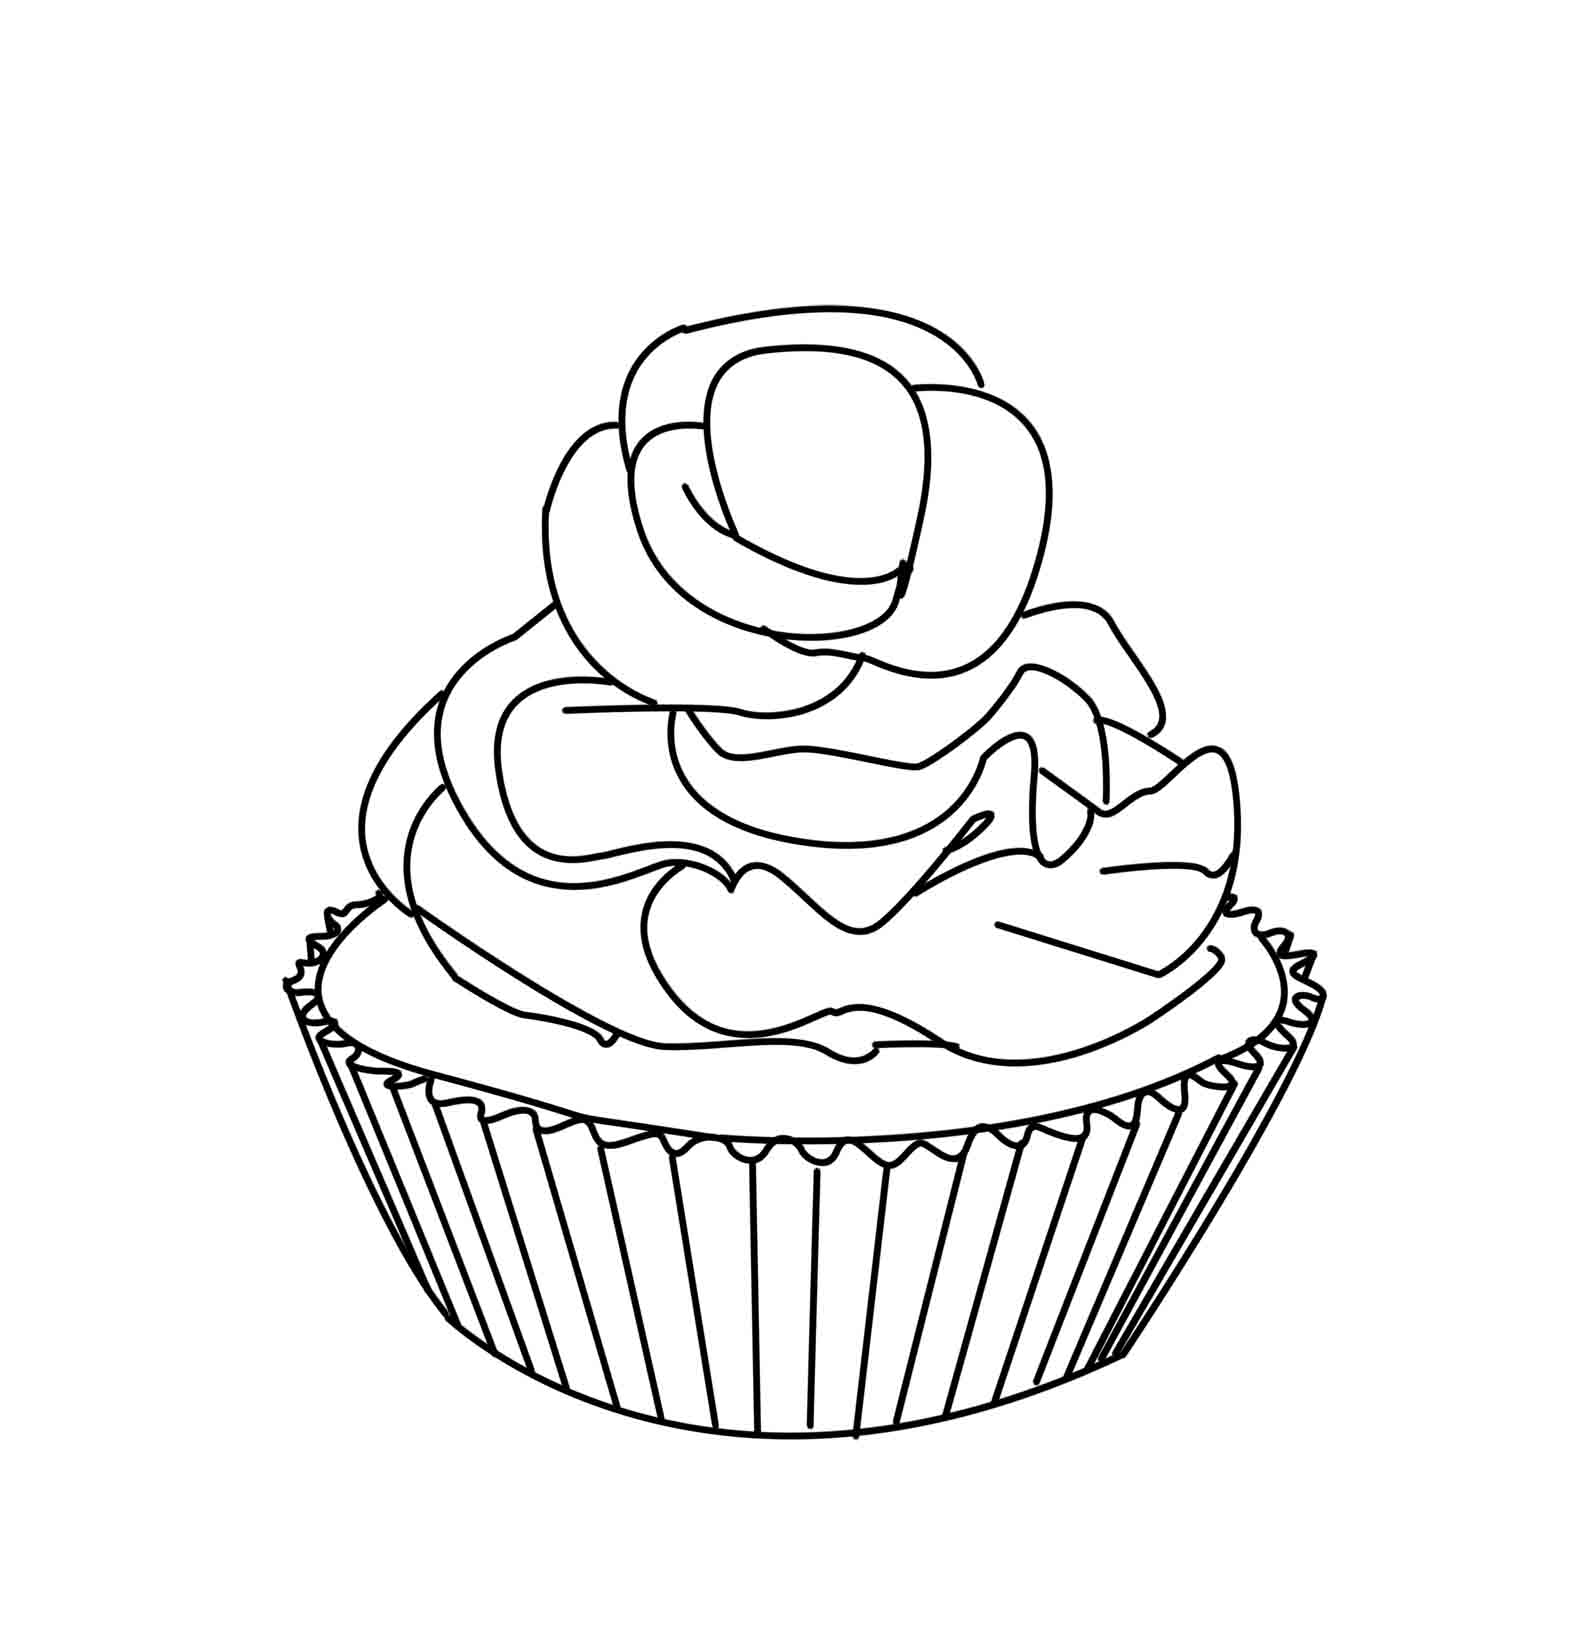 Cupcake Coloring Pages Free - Coloring Home